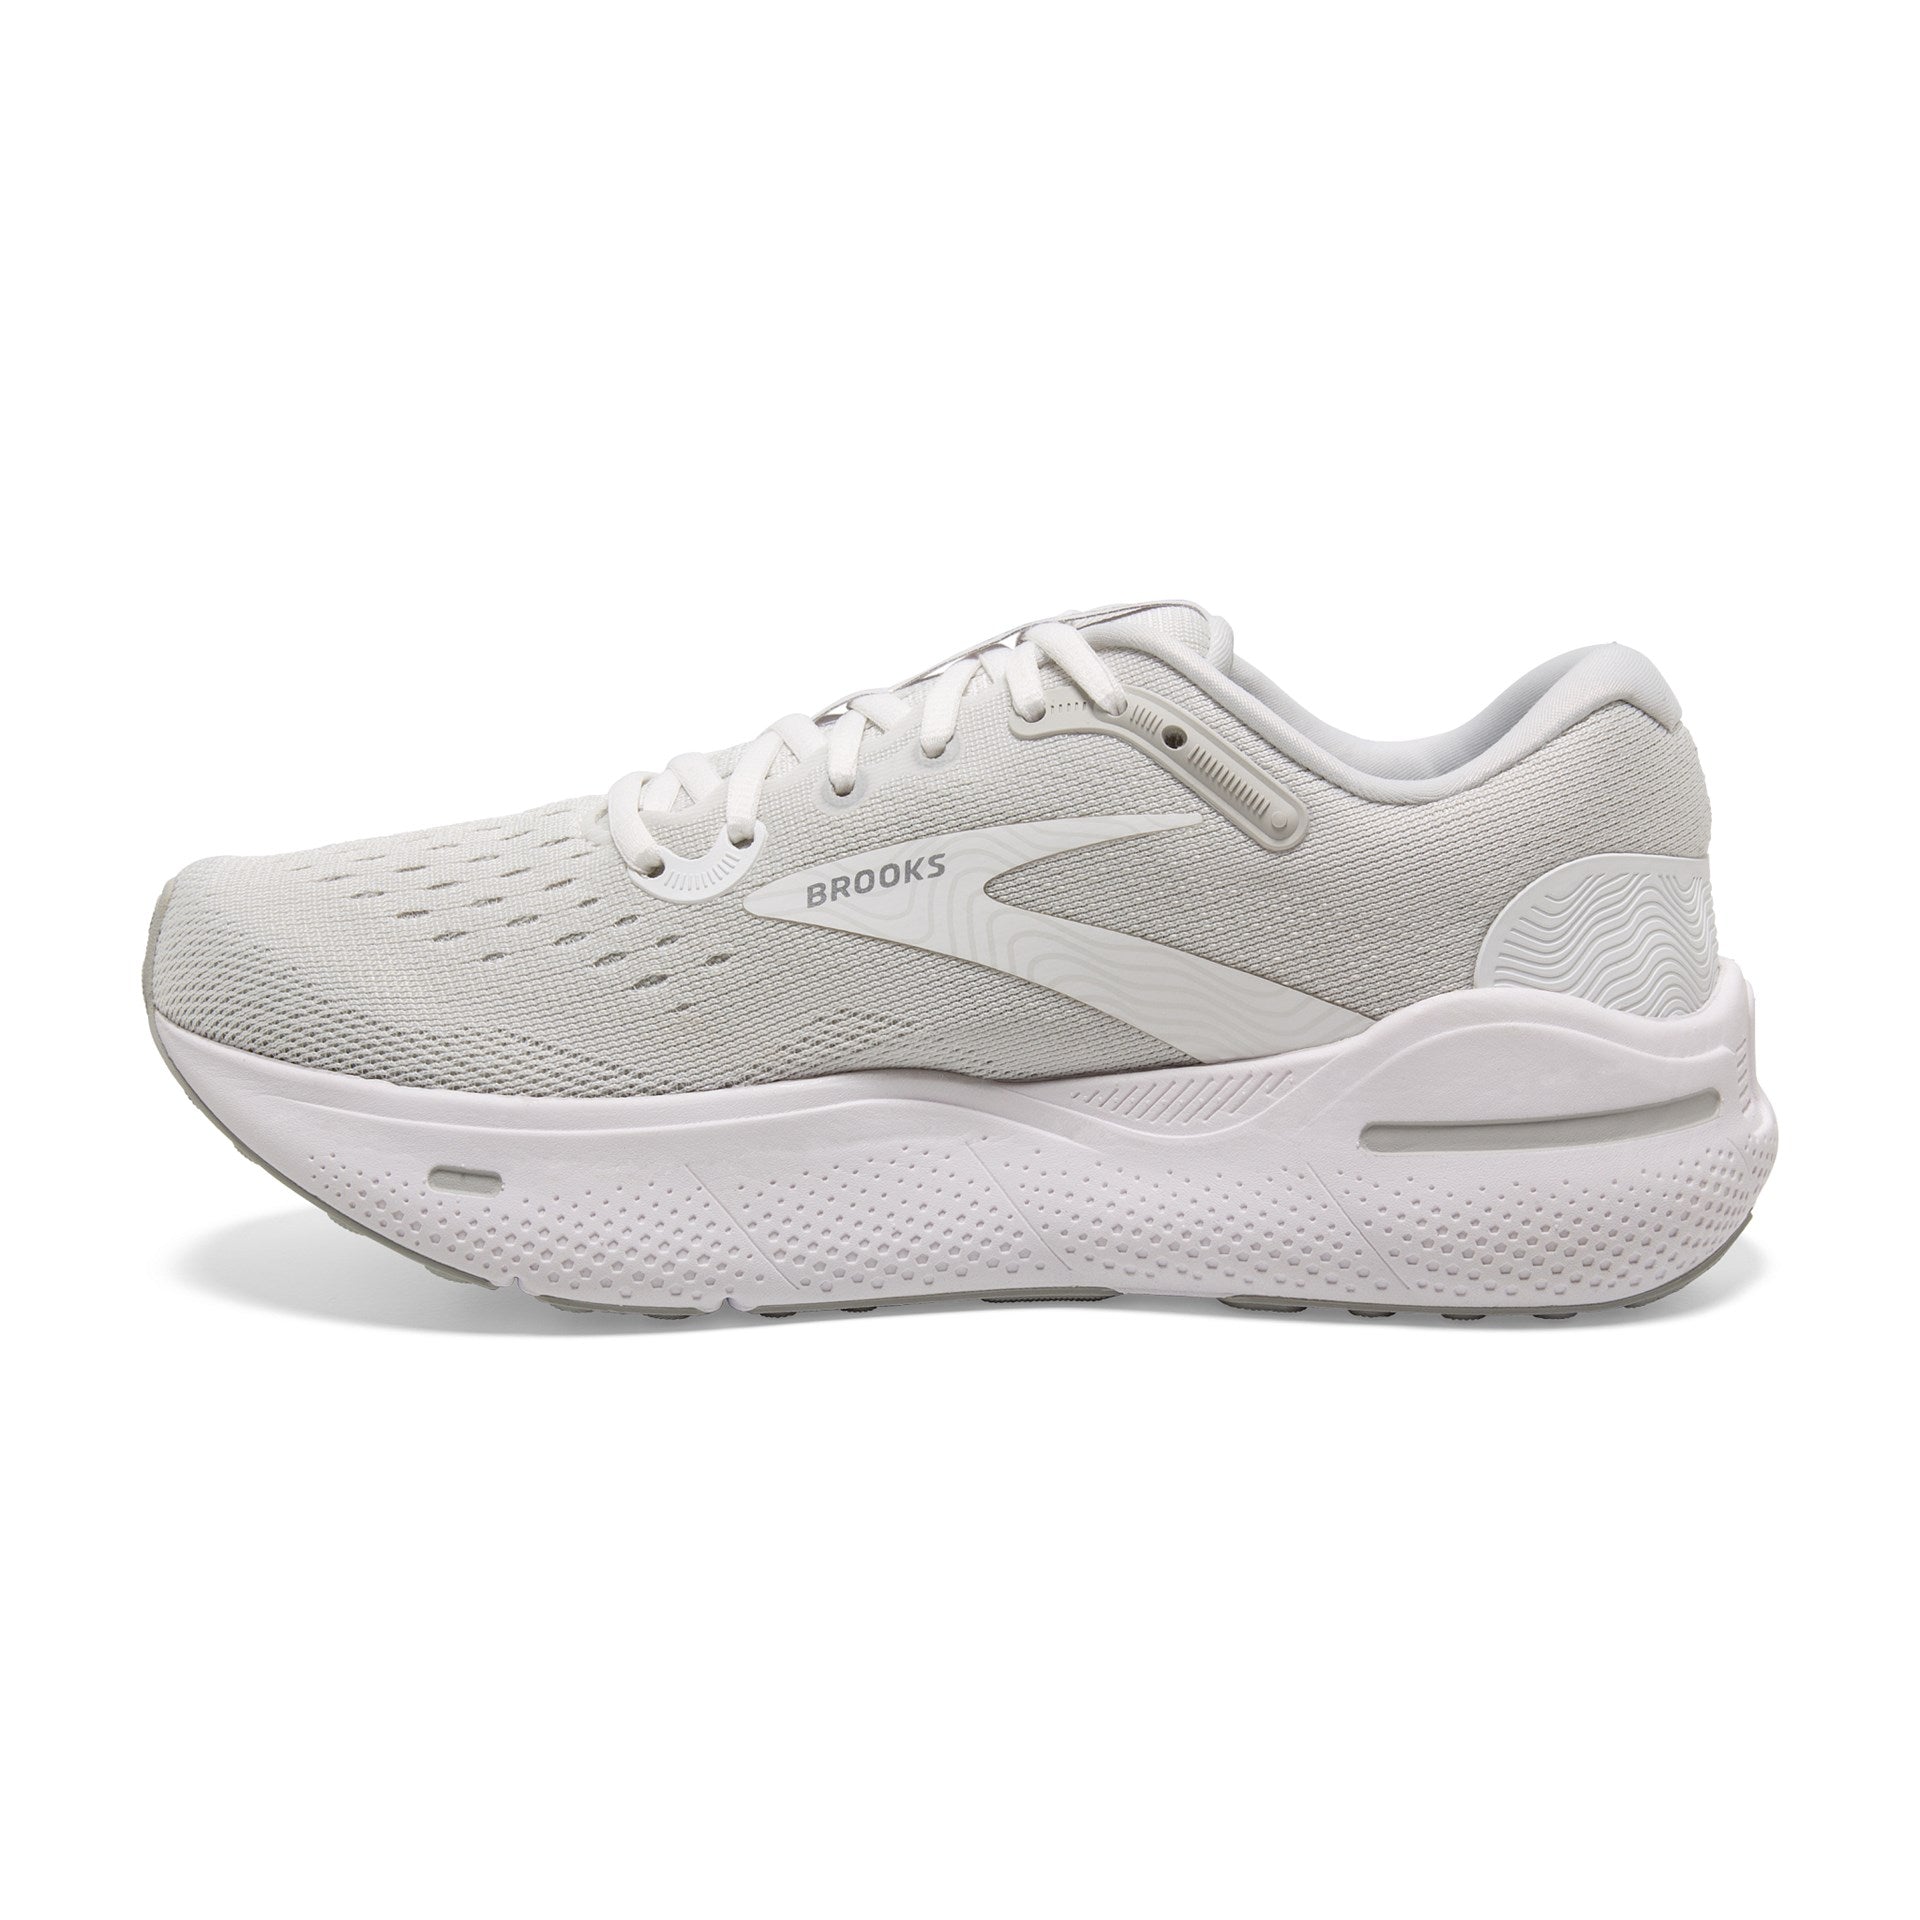 BROOKS MEN'S GHOST MAX - D - 124 WHITE/OYSTER/METALLIC SILVER 